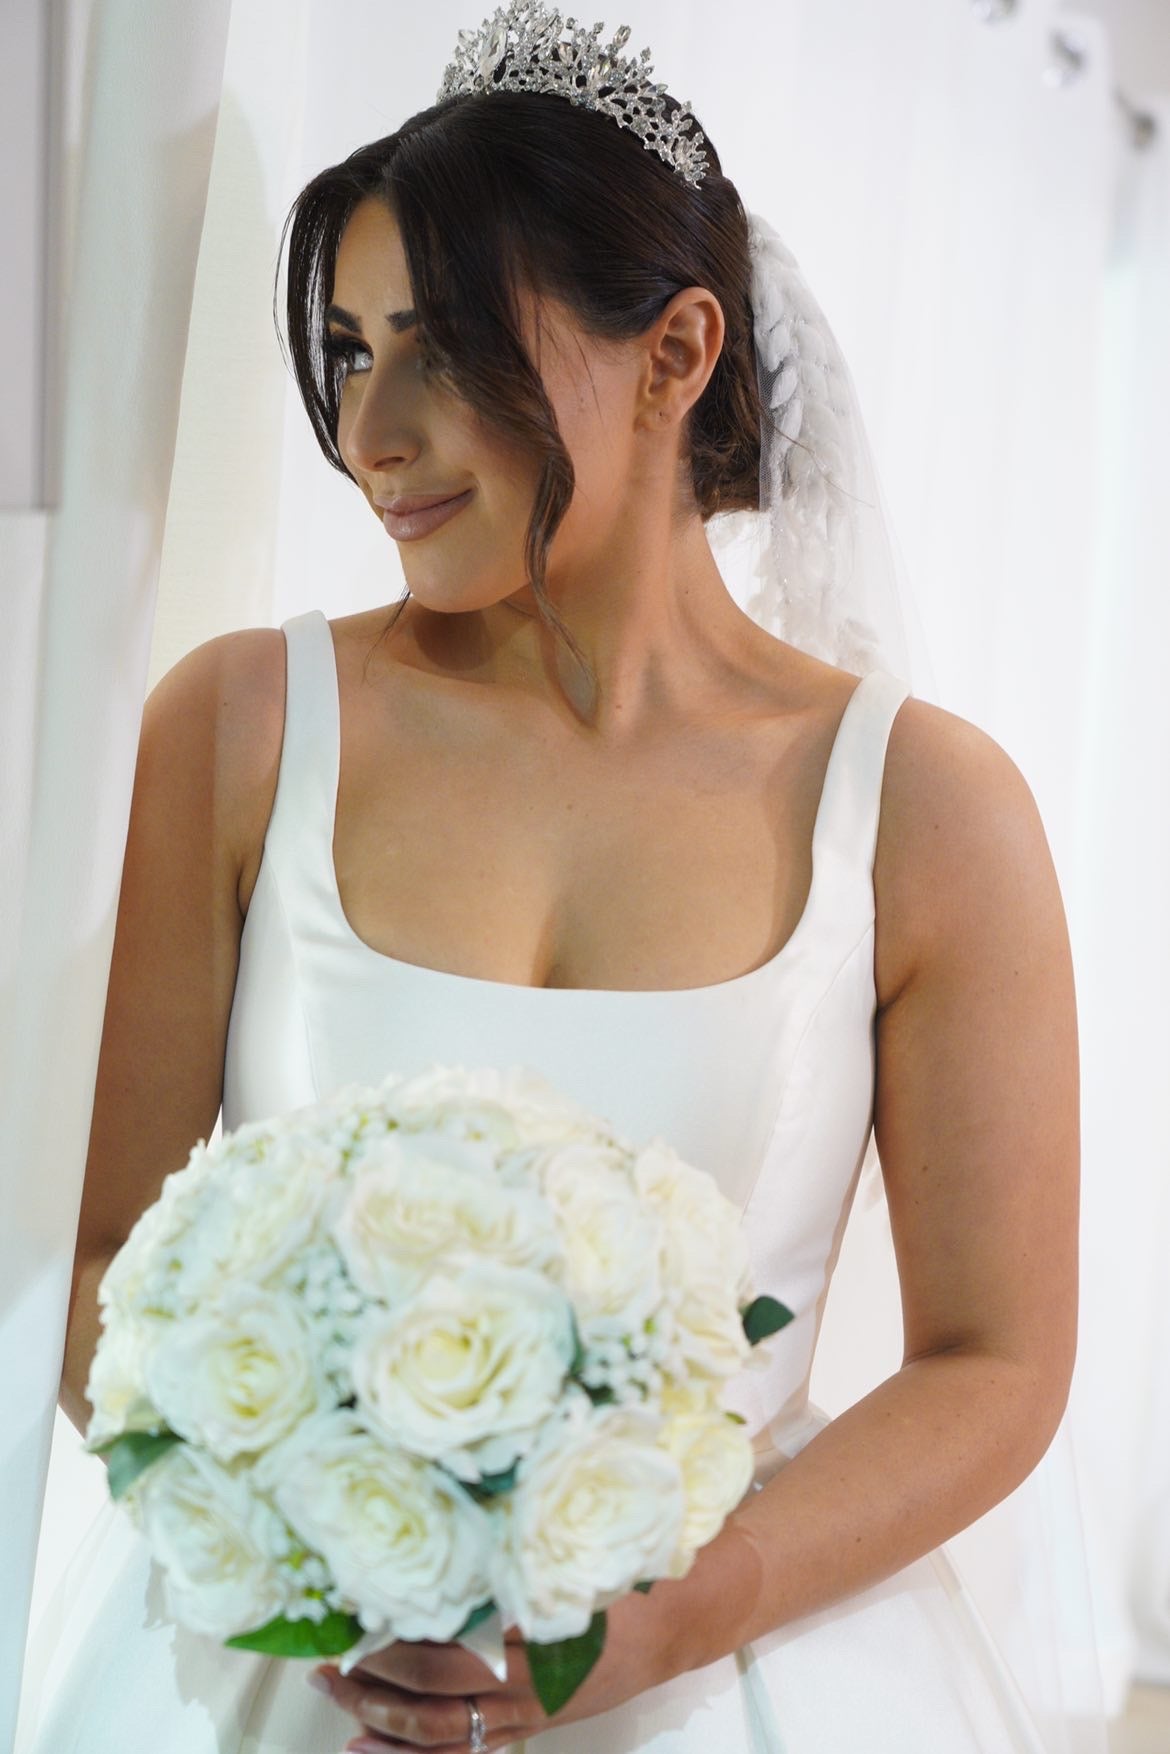 A bride in a white wedding gown holding a bouquet, wearing Estelle bridal tiara